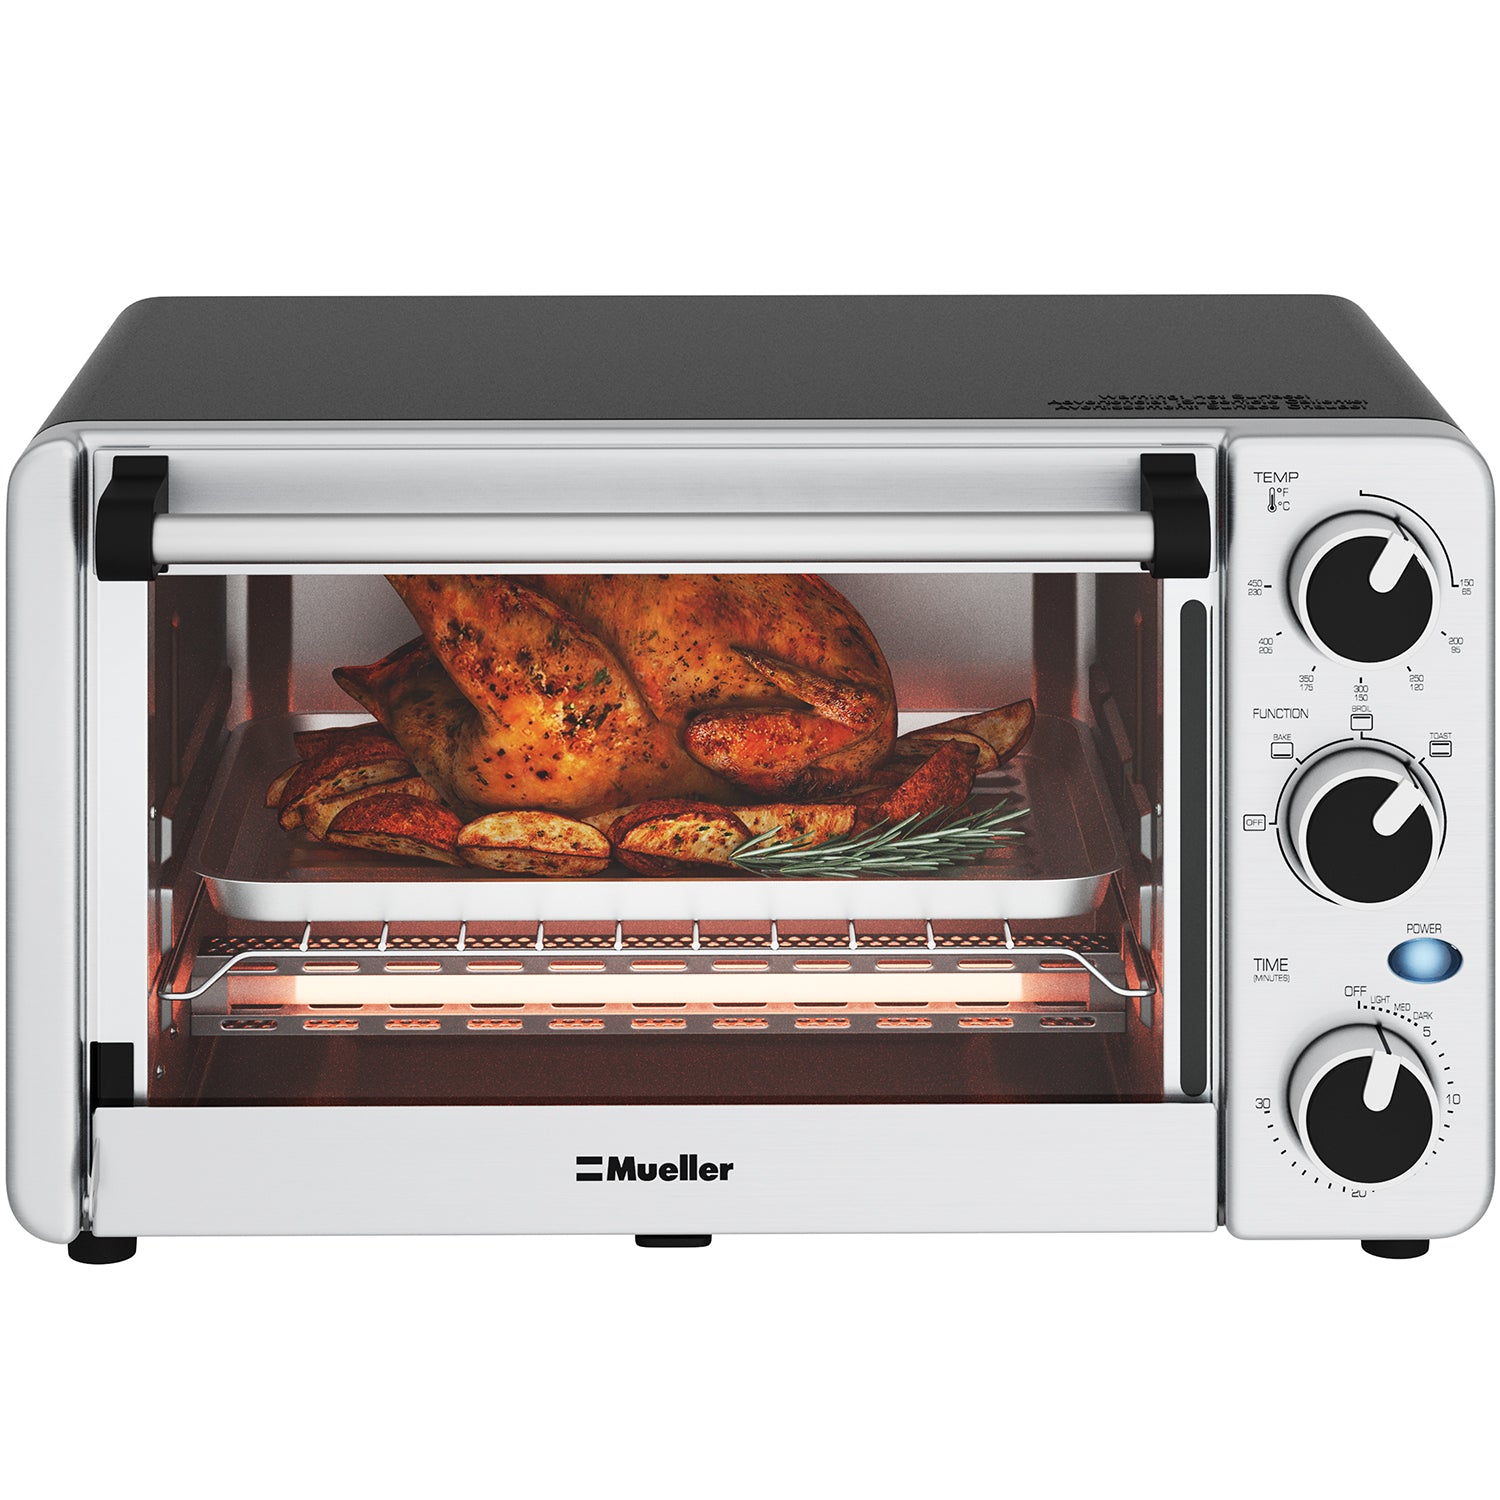 Mueller Home Toaster Oven & Reviews